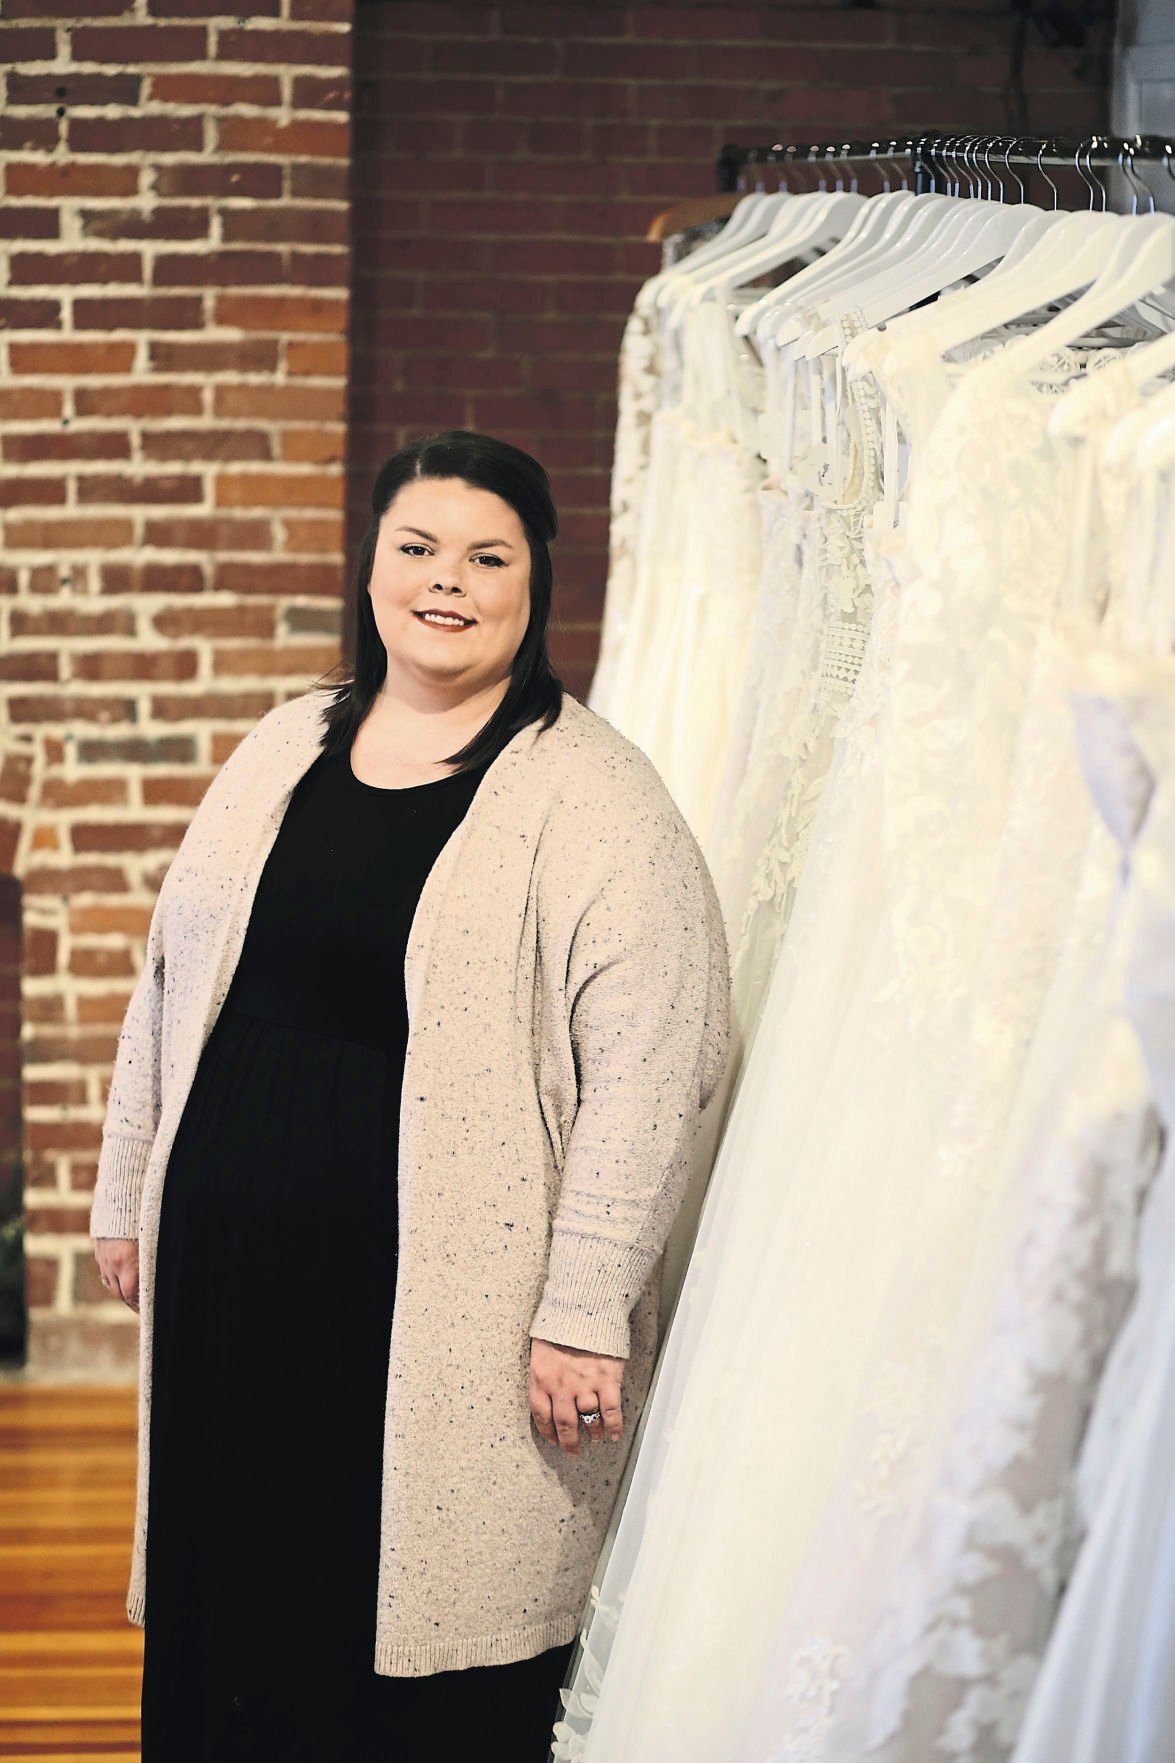 Shelby Duggan owns Vintage Chic Bridal Boutique in Dubuque.    PHOTO CREDIT: JESSICA REILLY